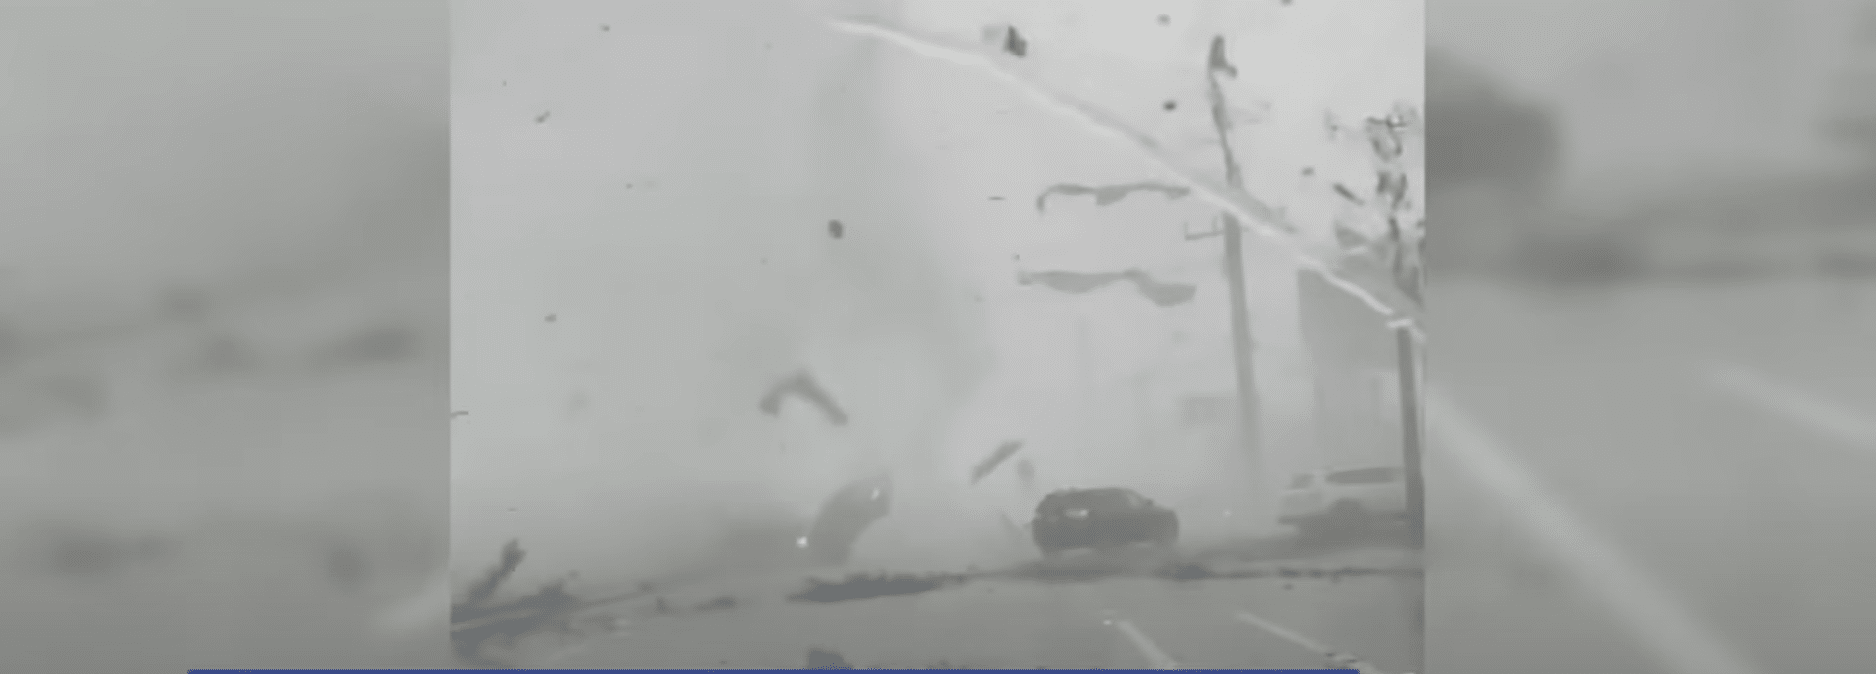 (WATCH) Tornado flips cars and leaves trail of damage in South Florida